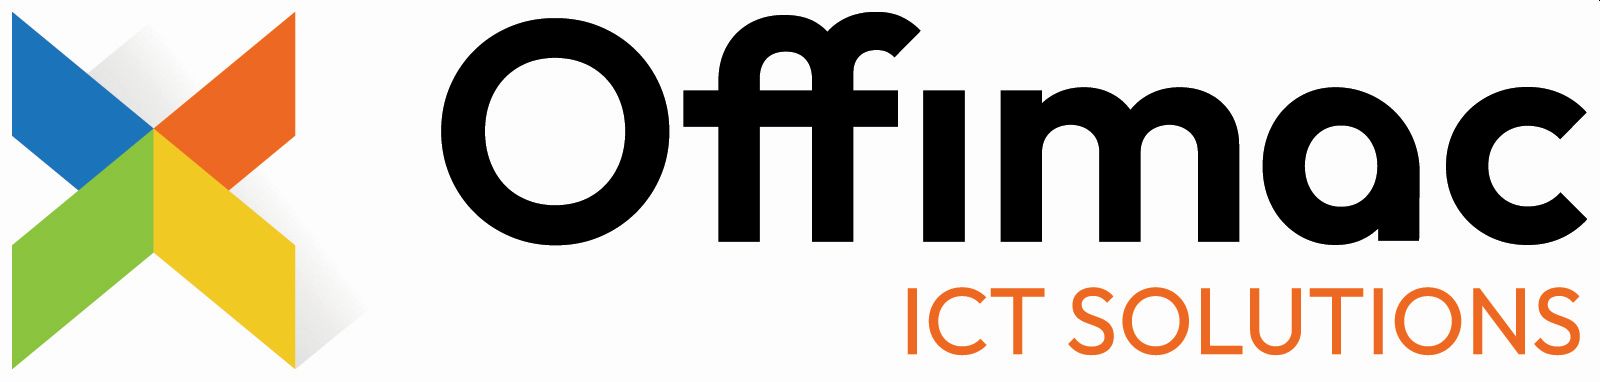 Offimac ICT Solutions